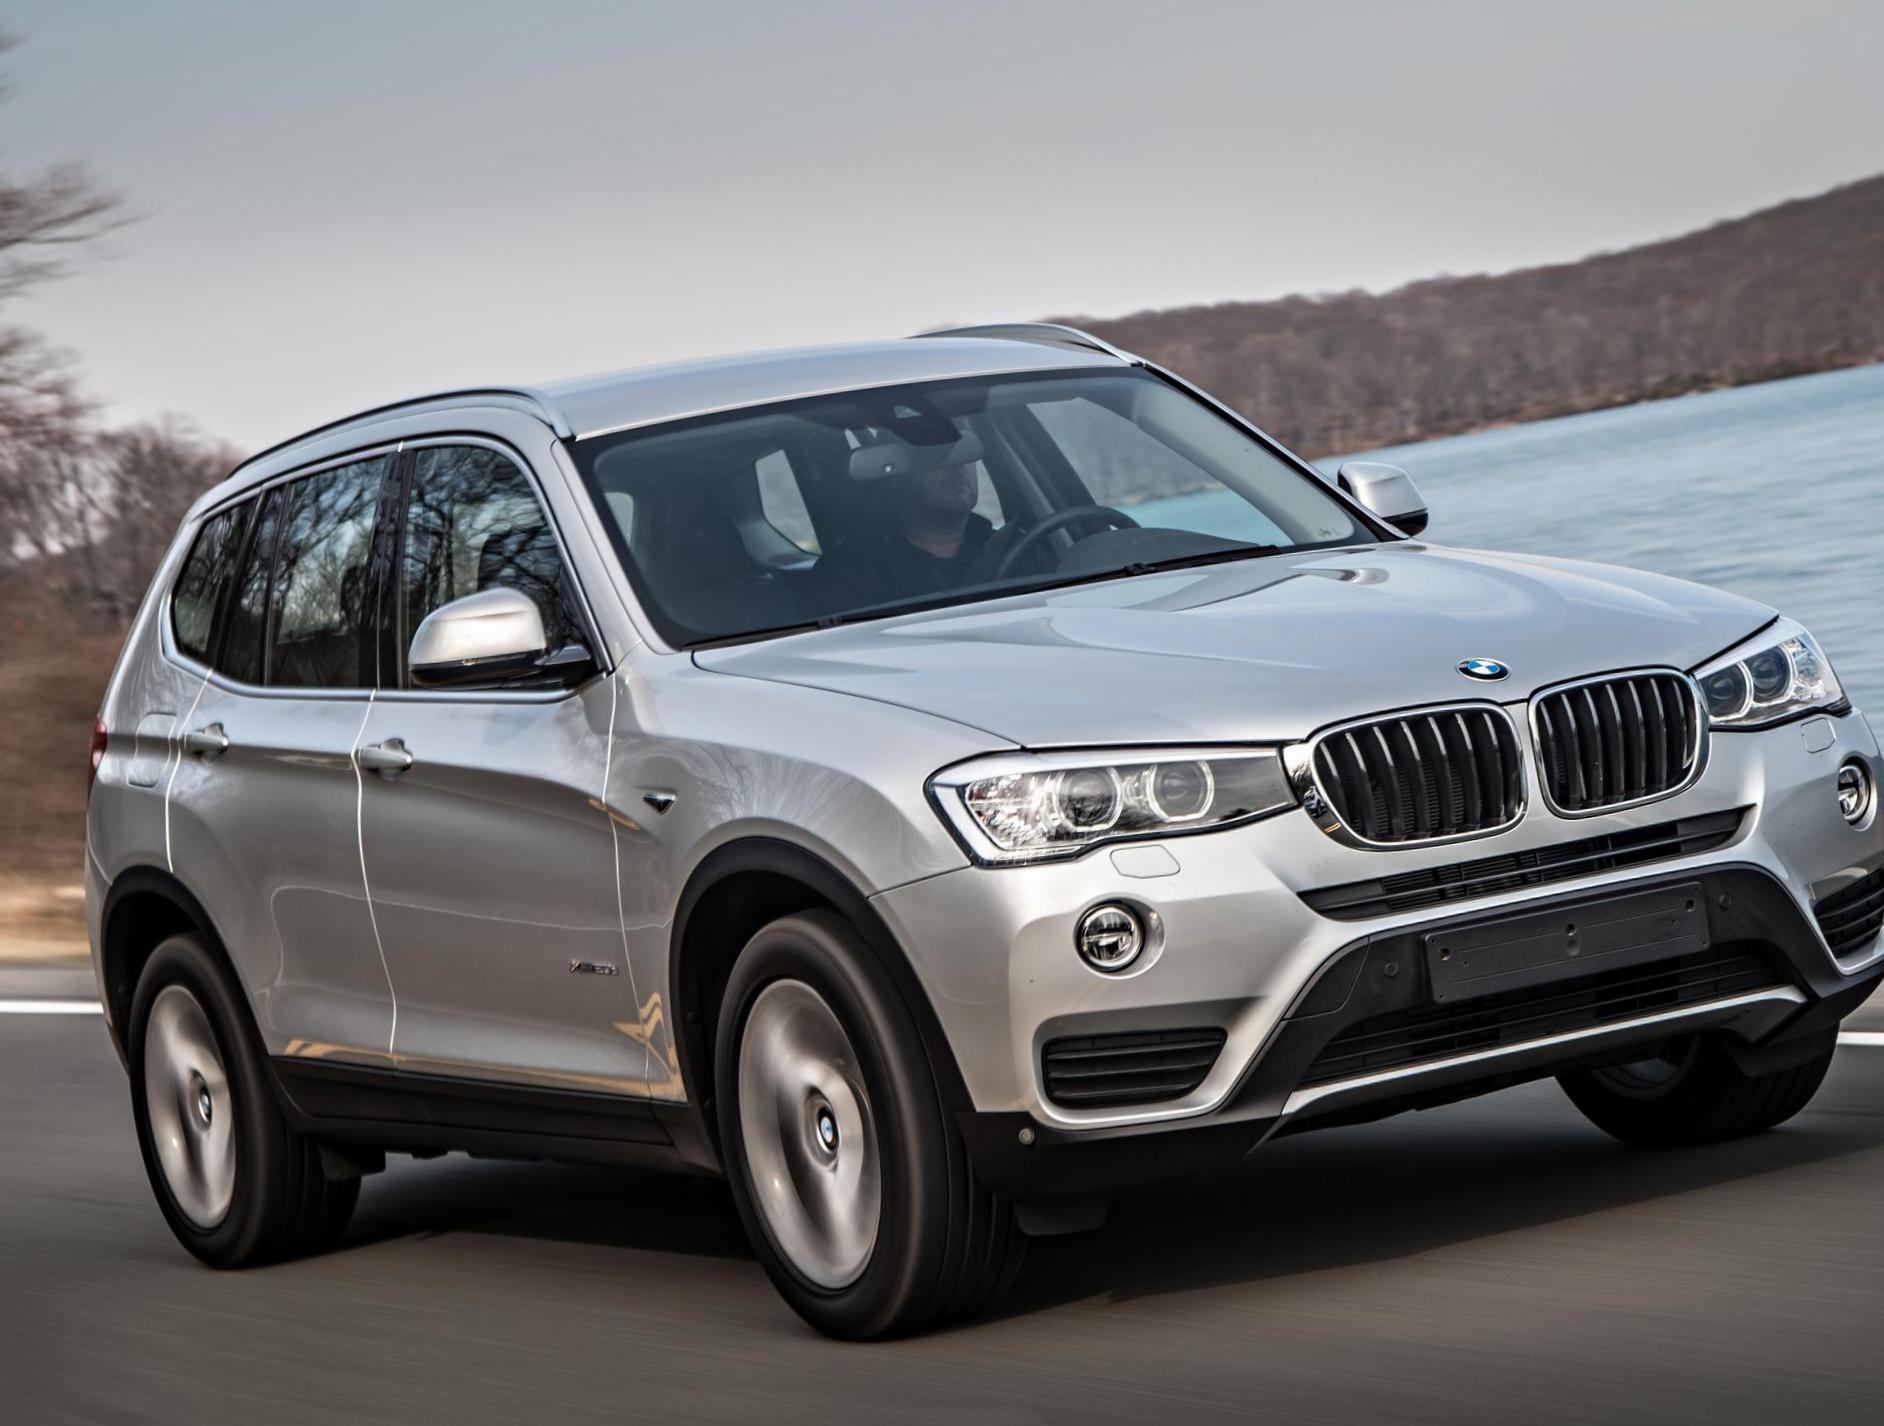 BMW X3 (F25) Photos and Specs. Photo X3 (F25) BMW for